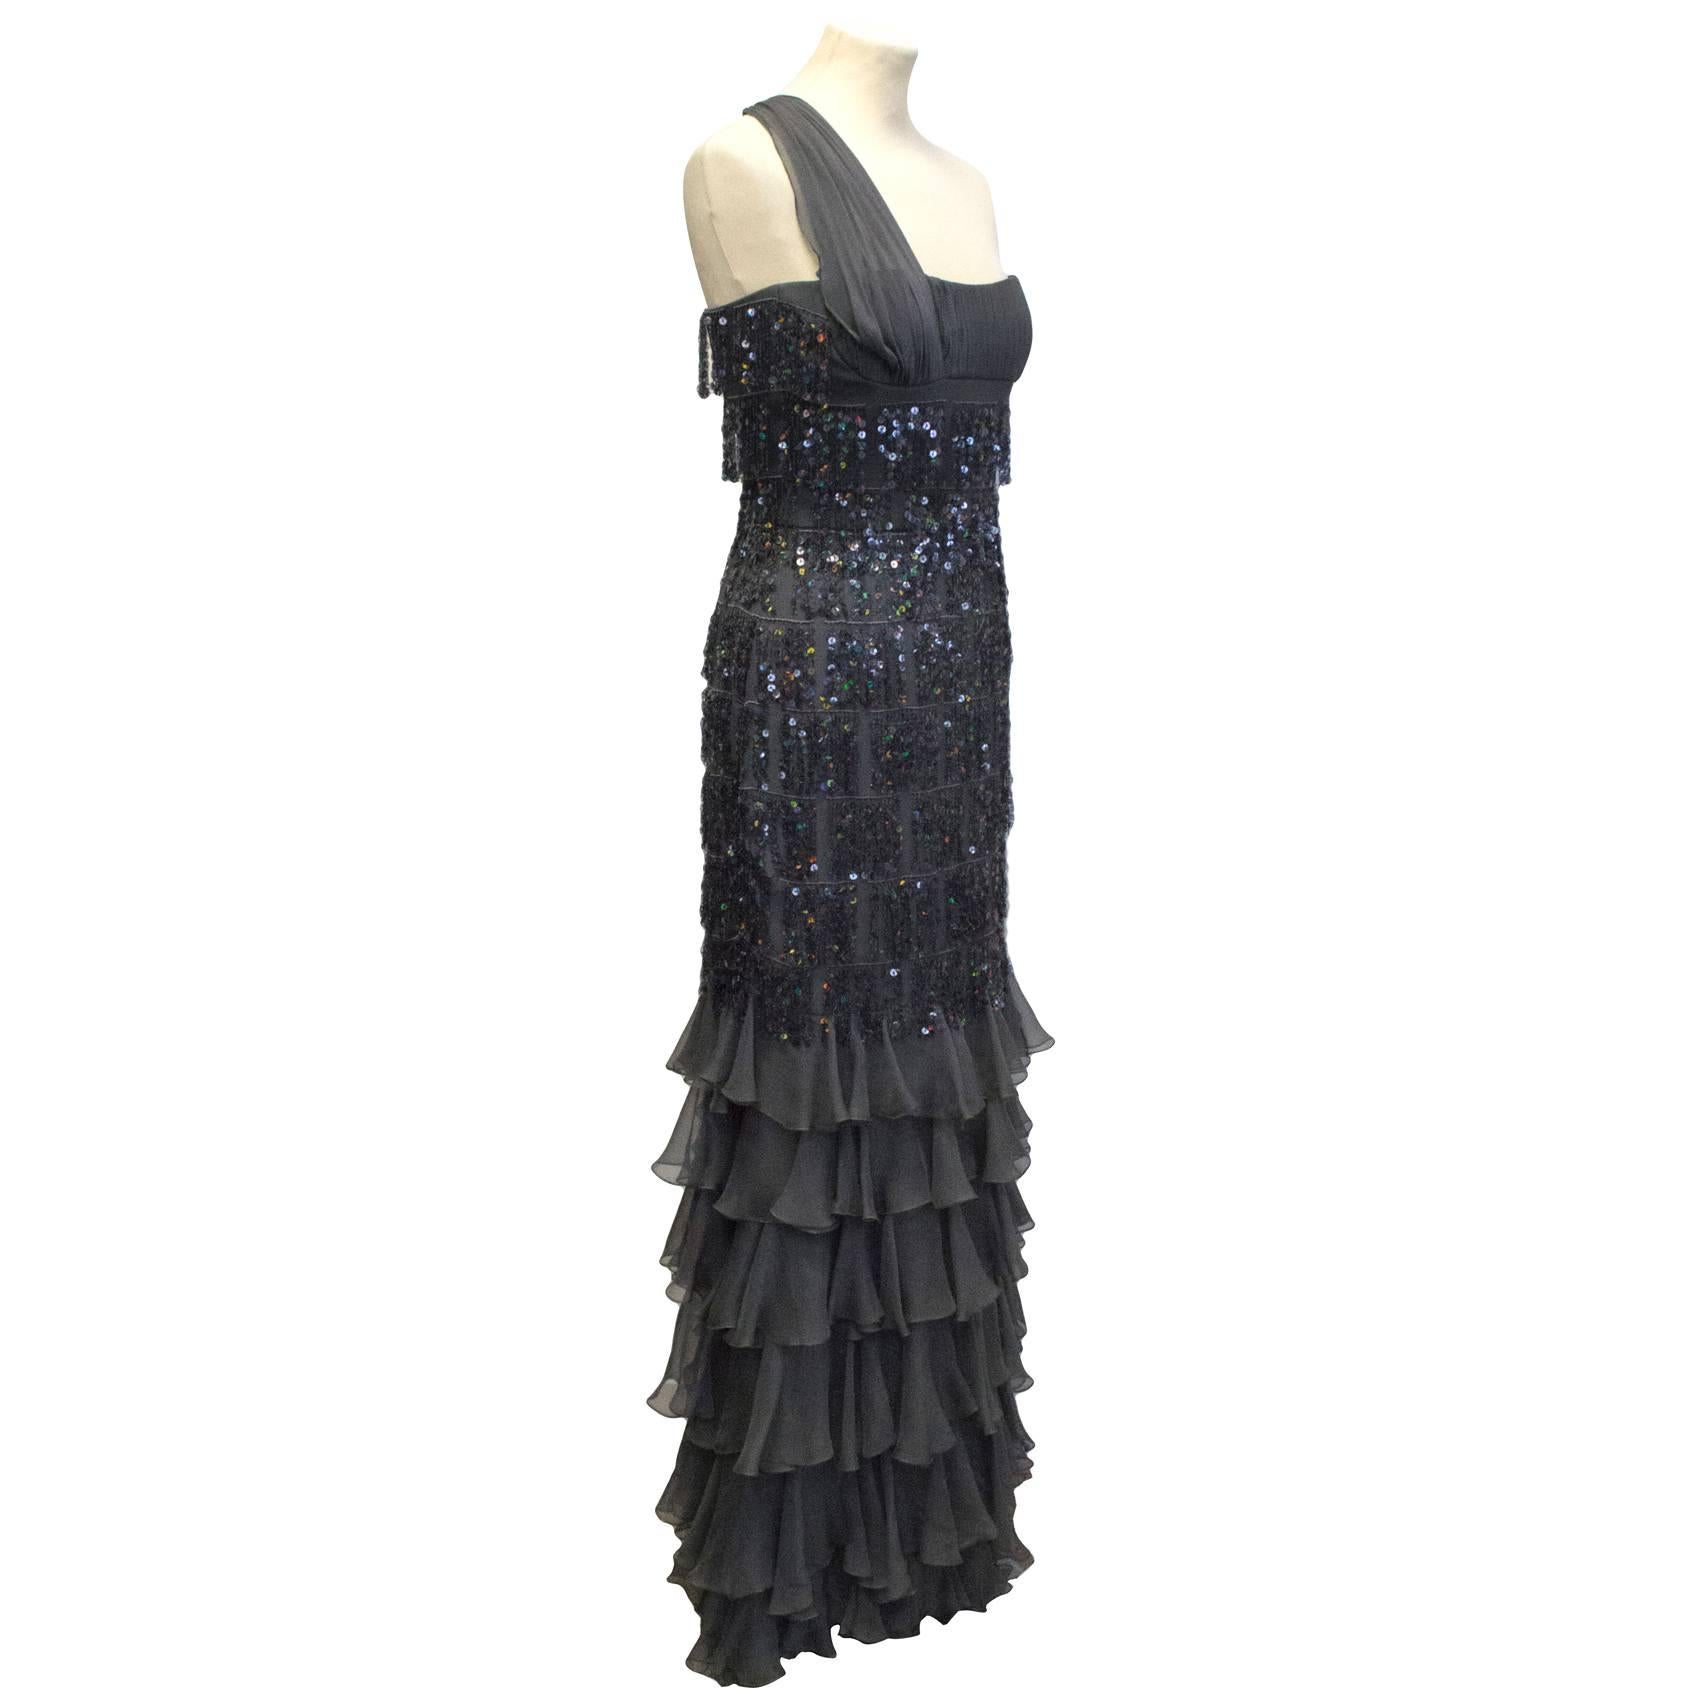 Jacques Azagury charcoal grey evening dress. This dress features a one shoulder strap, a sequinned tassel bustier and long flowing tiered ruffle skirt. 

The dress is fastened by a concealed zip at the back and a small clasp on the inside of the